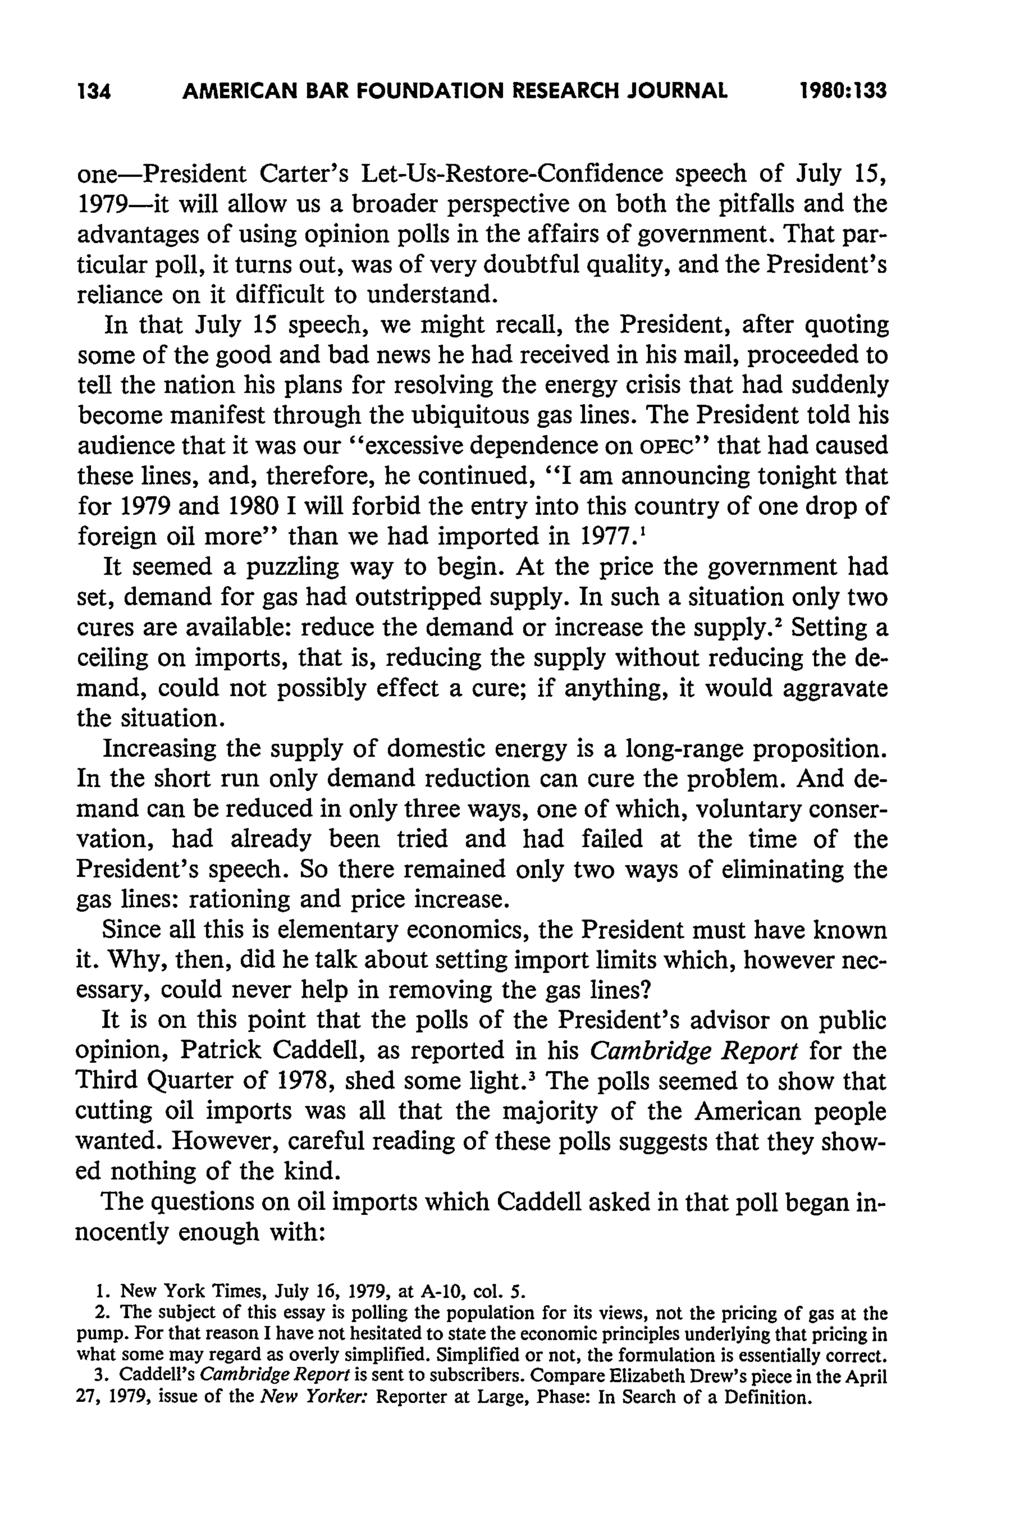 AMERICAN BAR FOUNDATION RESEARCH JOURNAL 1980:133 one-president Carter's Let-Us-Restore-Confidence speech of July 15, 1979-it will allow us a broader perspective on both the pitfalls and the